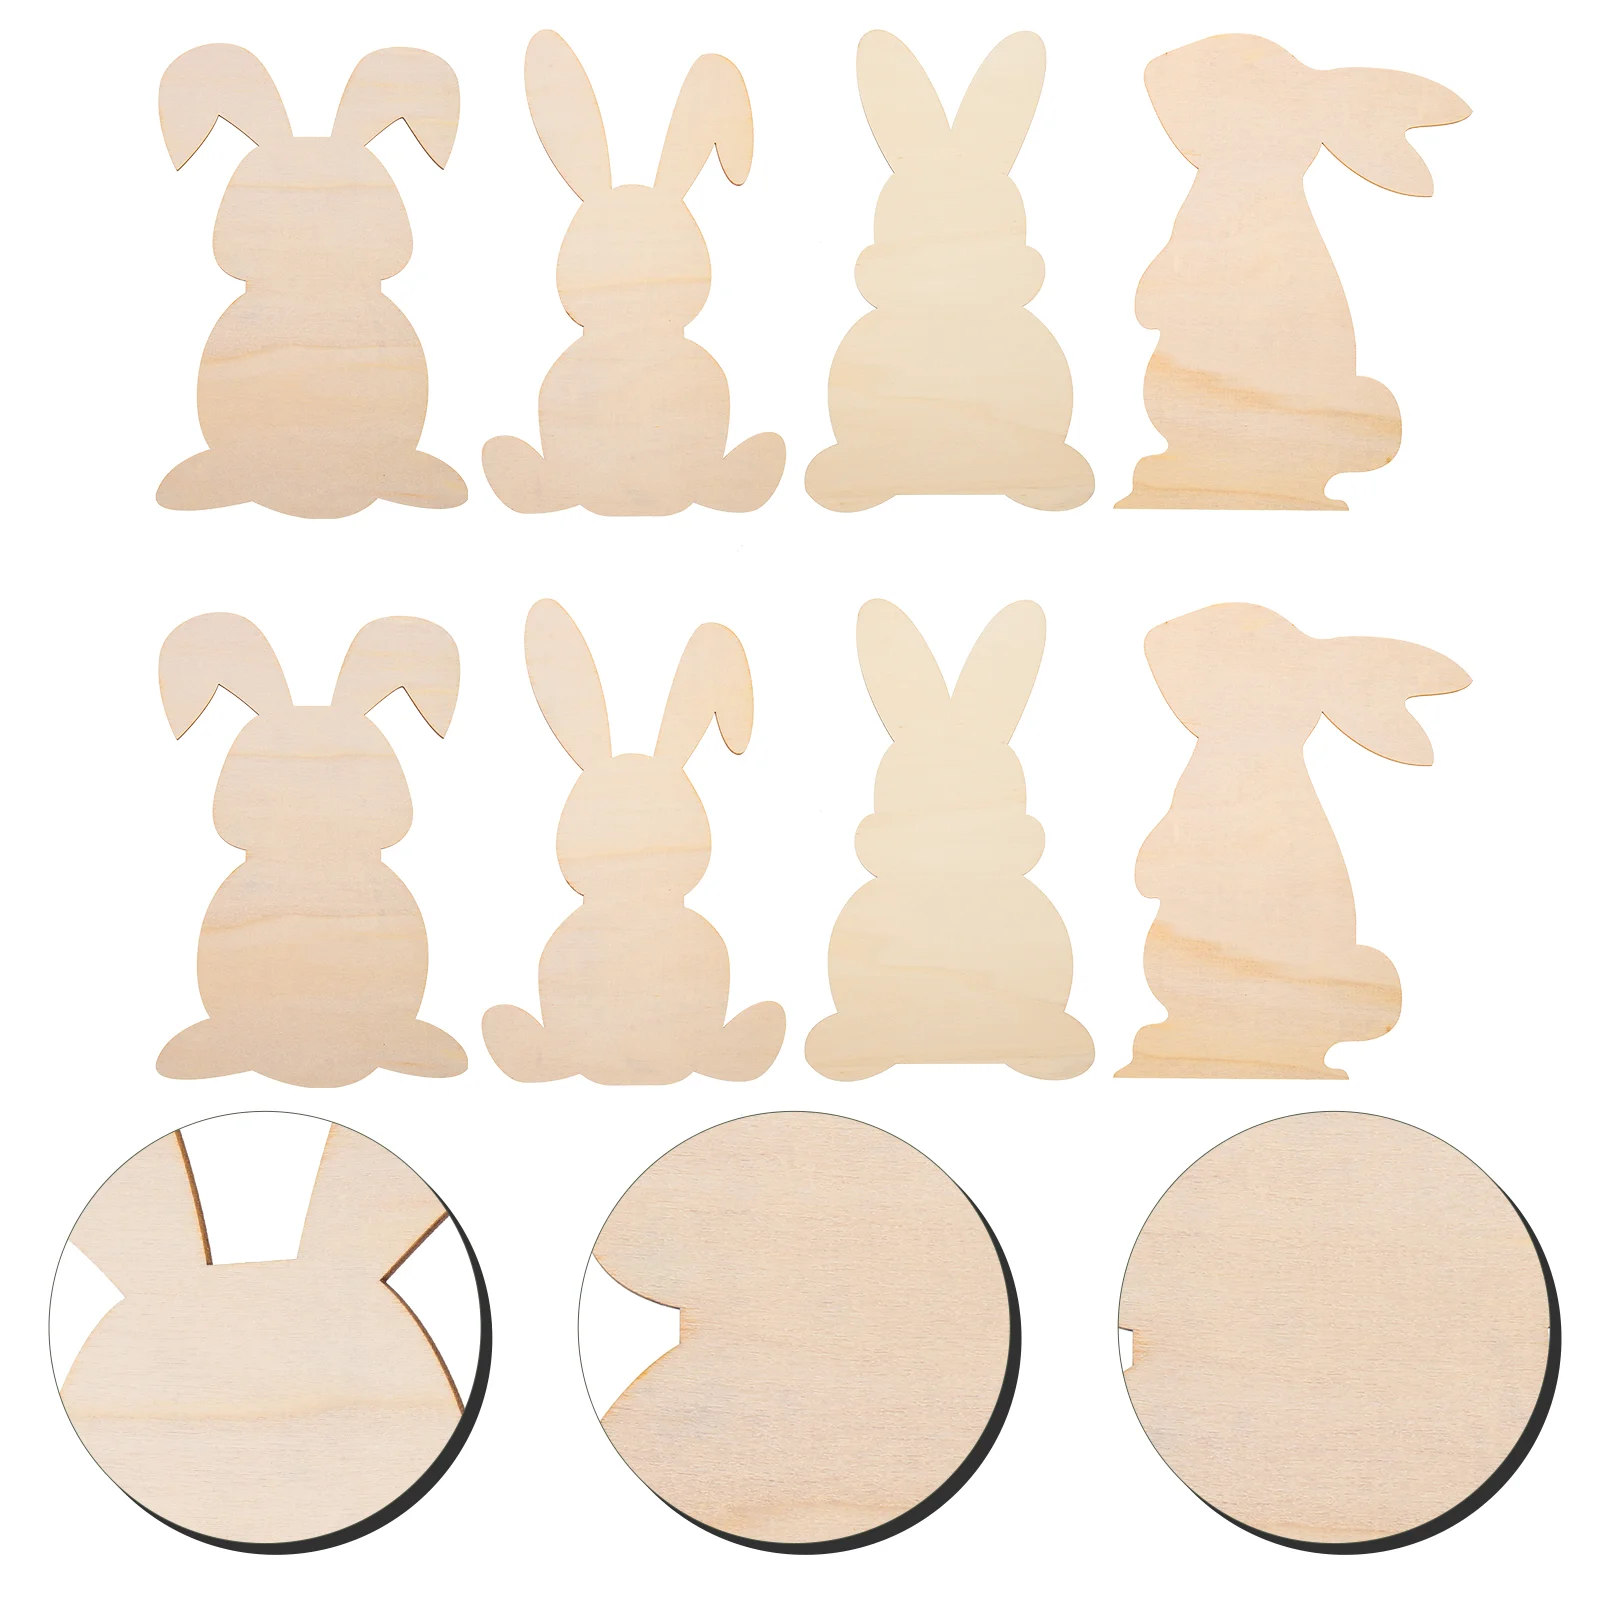 

Easter Bunny Wood Wooden Cutouts Crafts Unfinished Slices Cutout Rabbit Decorations Ornaments Blank Diy Ornament Decor Hanging